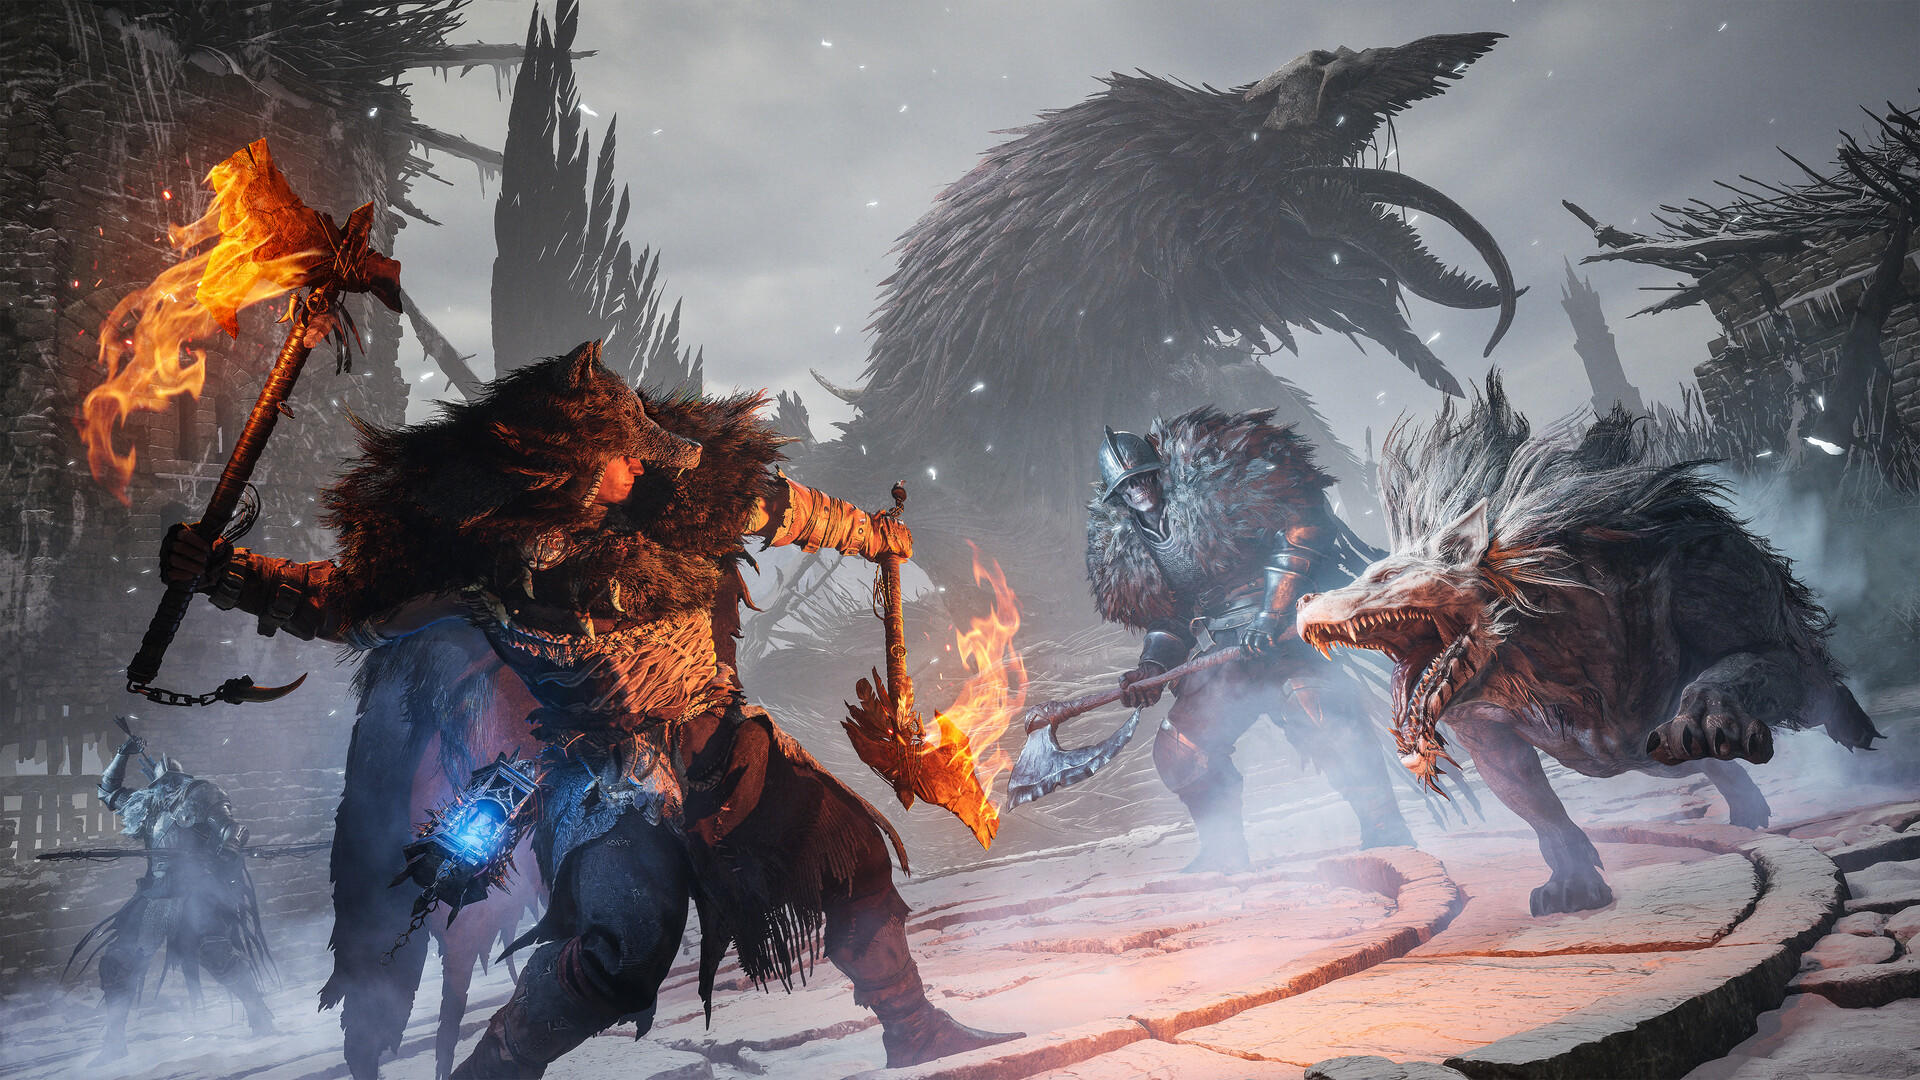 Lords of the Fallen Gets October Release Date - Fextralife